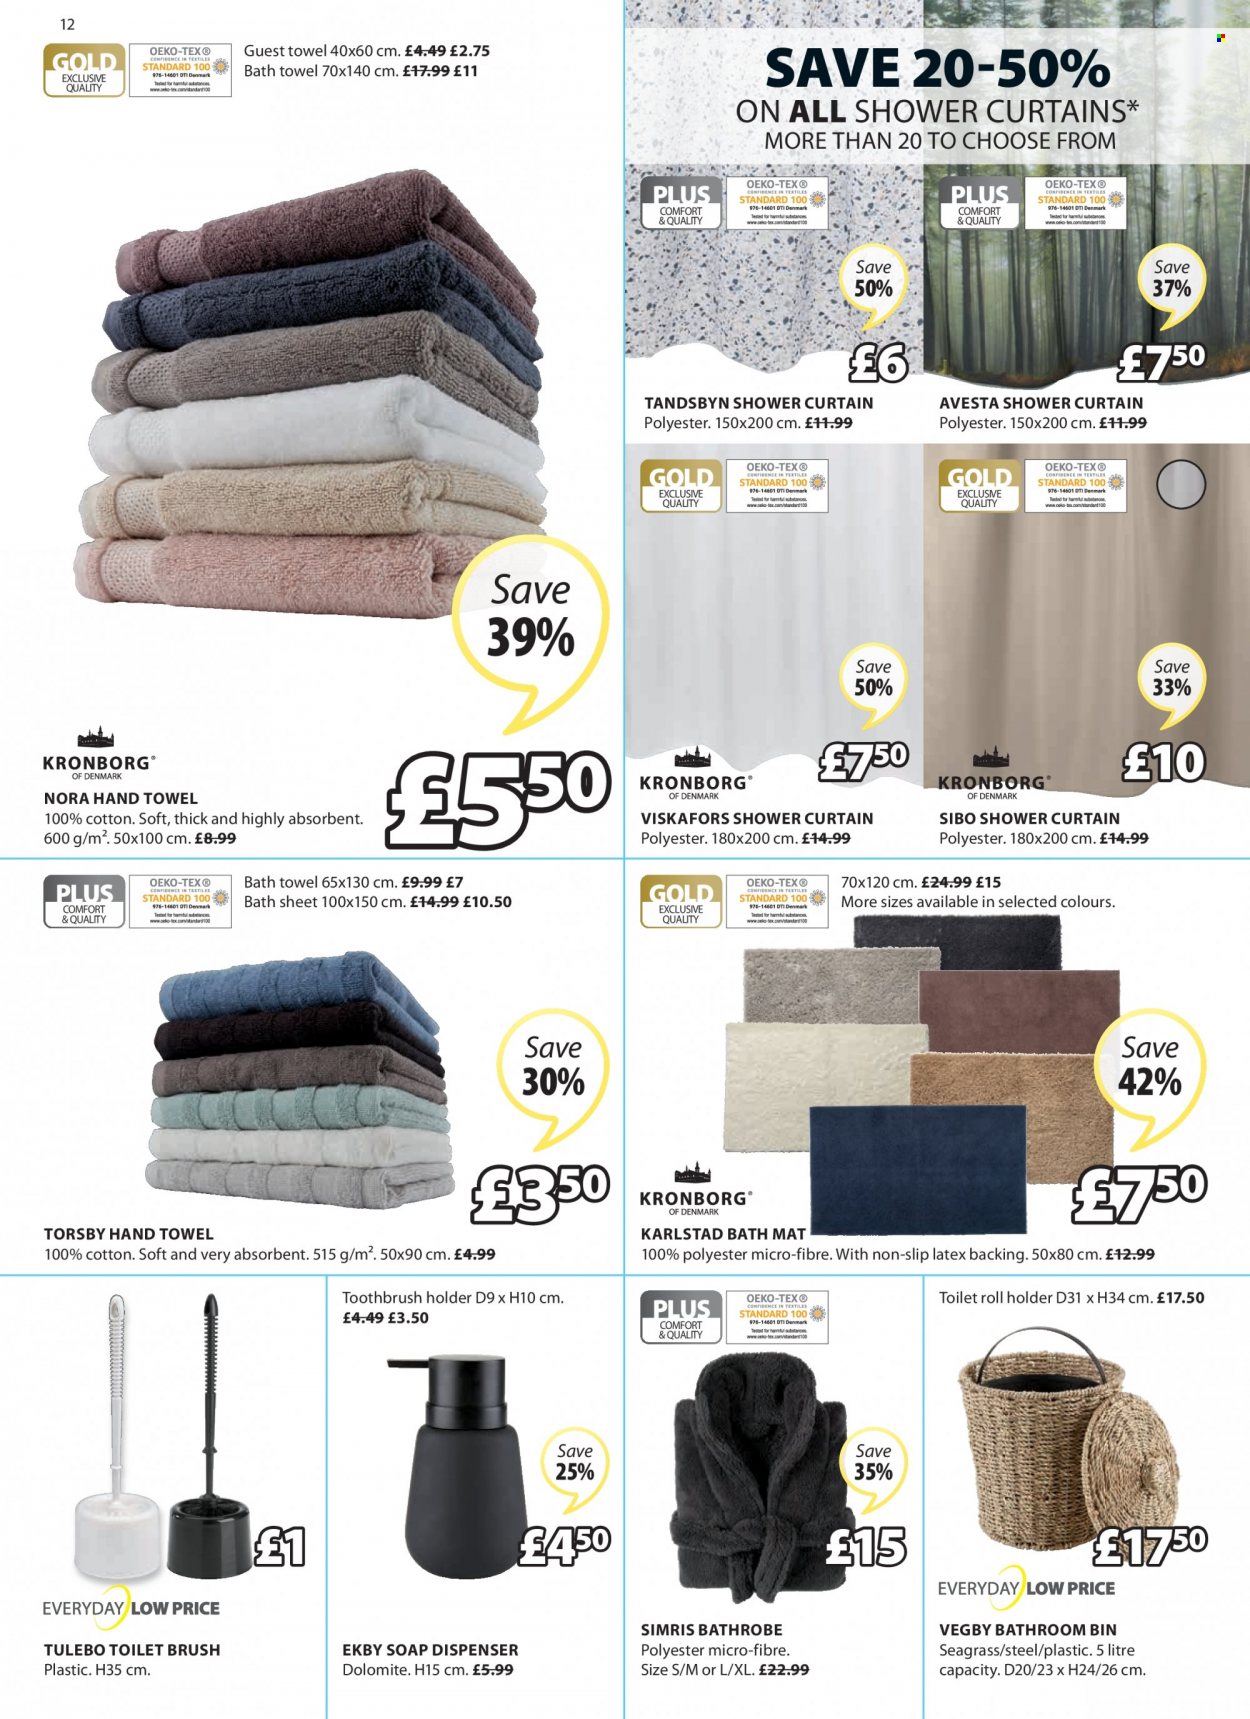 thumbnail - JYSK offer  - 19/05/2022 - 01/06/2022 - Sales products - toothbrush, bin, holder, shower curtain, soap dispenser, toilet brush, toilet roll holder, toothbrush holder, dispenser, curtain, bath mat, bath towel, towel, hand towel, bathrobe. Page 12.